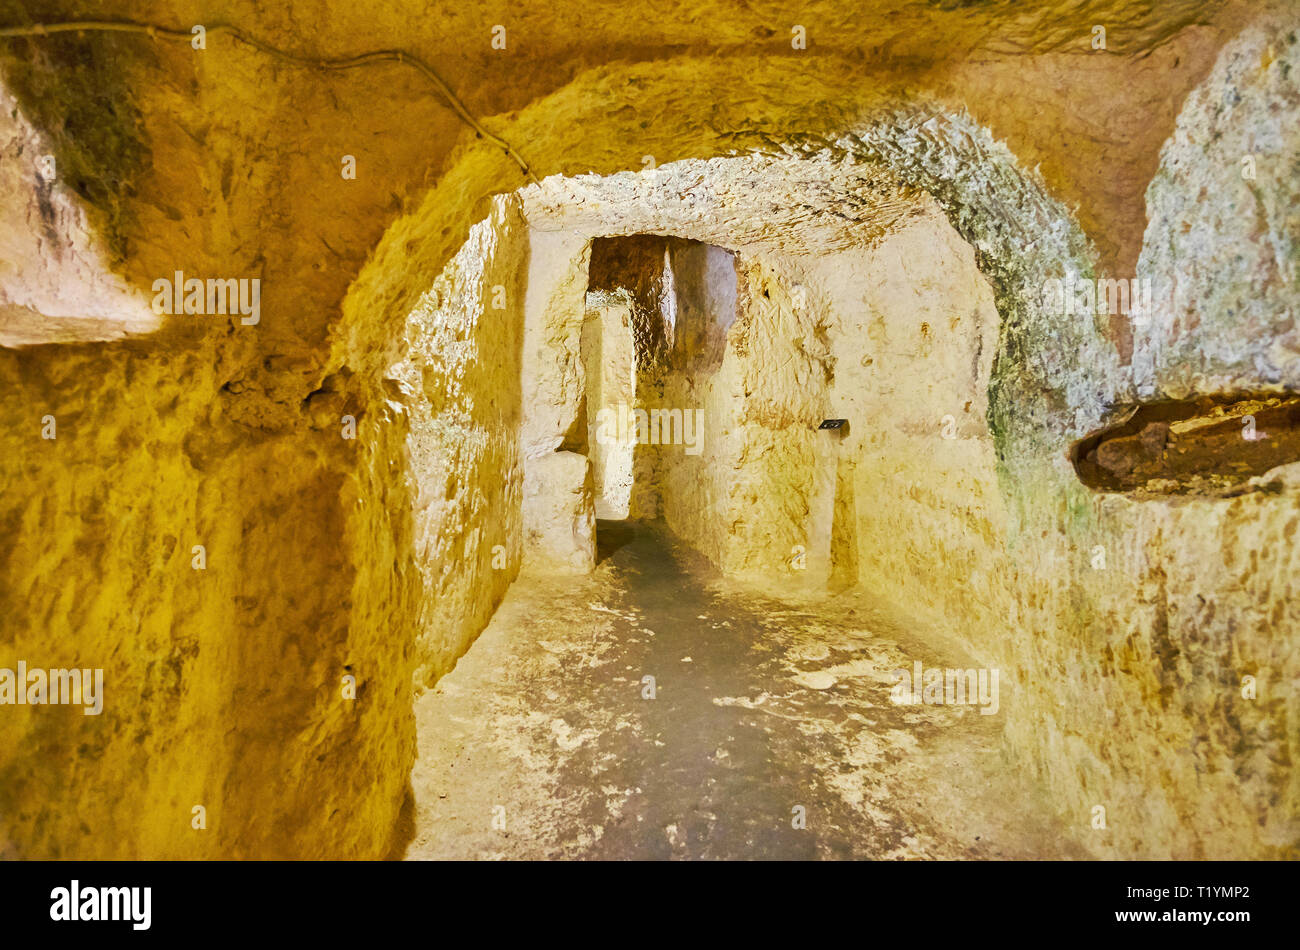 RABAT, MALTA - JUNE 16, 2018: Interior of the stone shelter, used by local people during the WWII, cut in limestone under the Wignacourt Residence, on Stock Photo